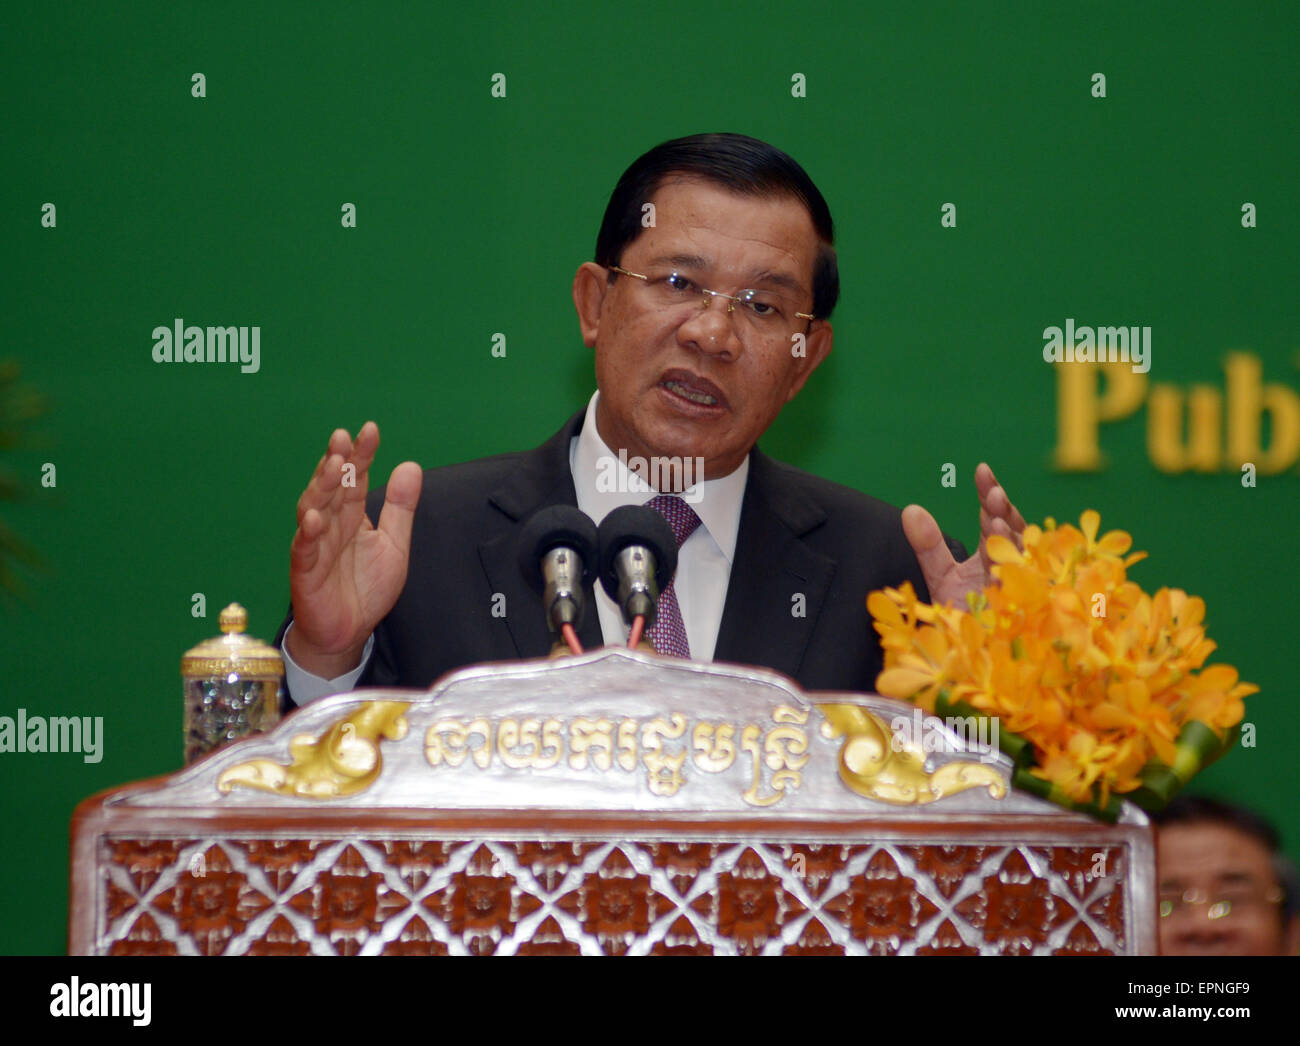 Phnom Penh, Cambodia. 20th May, 2015. Cambodian Prime Minister Hun Sen speaks during an annual meeting on public financial management reform program in Phnom Penh, Cambodia, on May 20, 2015. Hun Sen said Wednesday that the Southeast Asian country has maintained good political and macroeconomic stability in the last two decades. © Sovannara/Xinhua/Alamy Live News Stock Photo